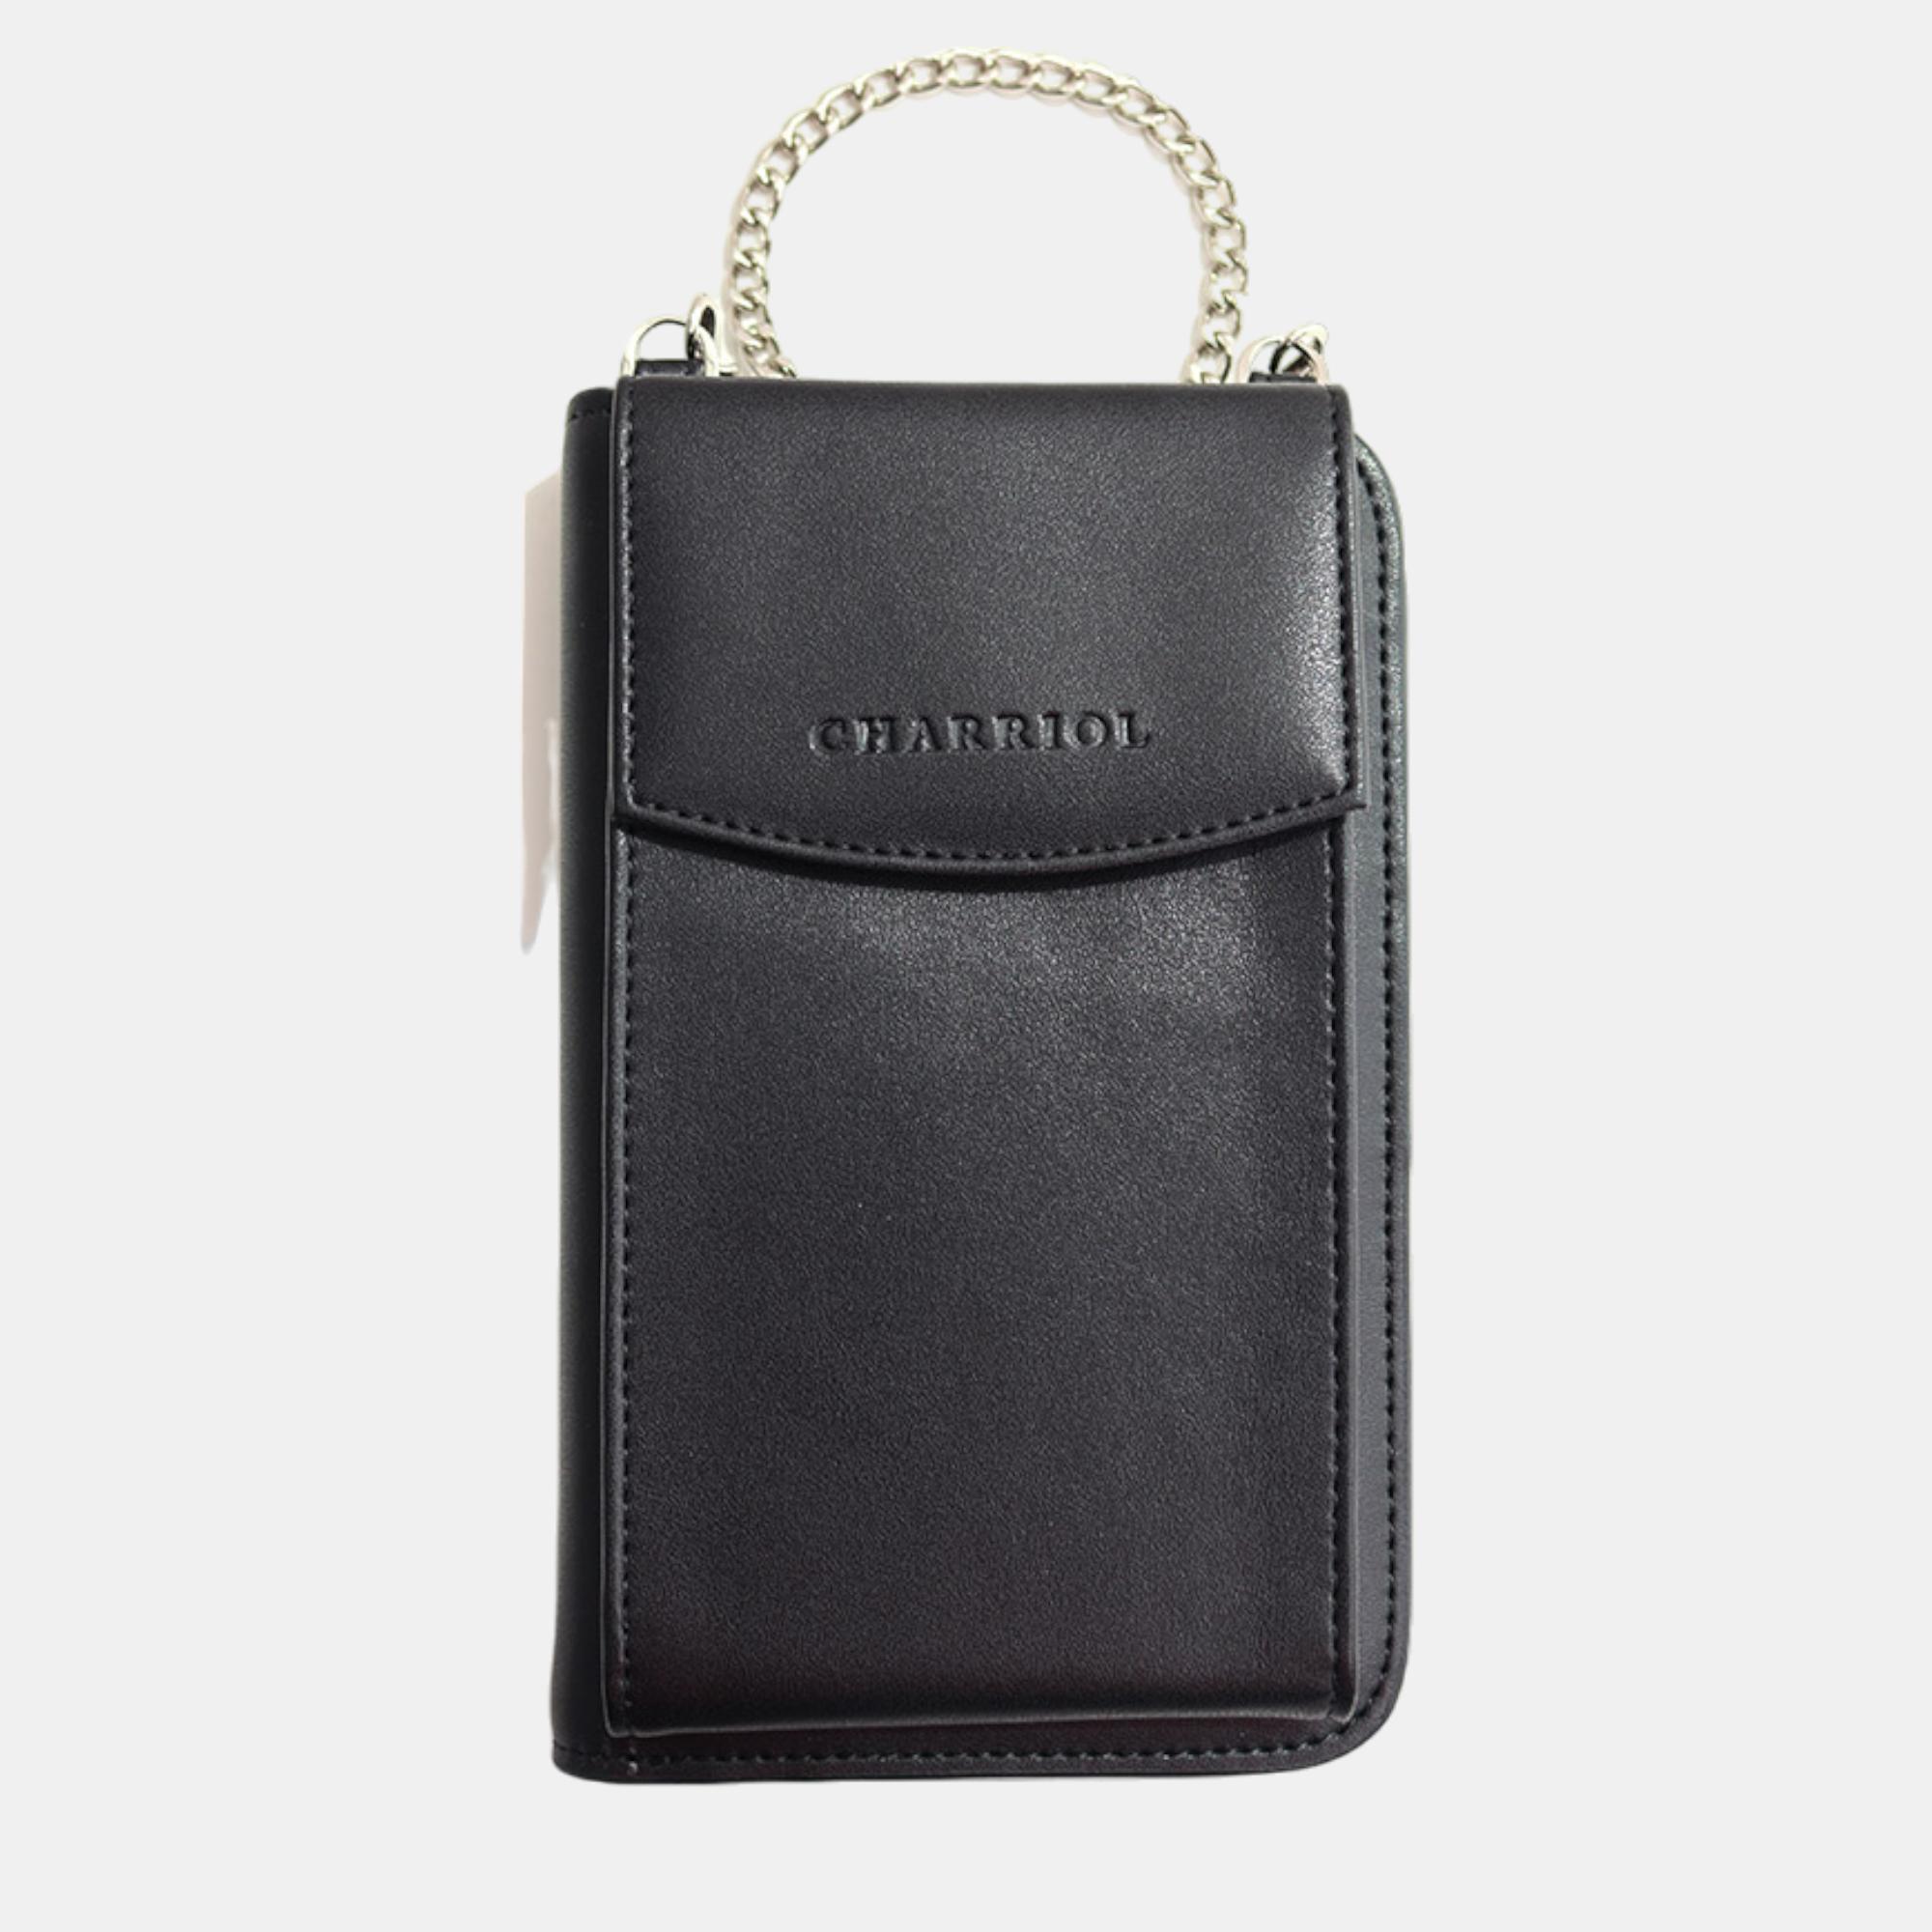 Charriol Black Leather  Mobile Accessories